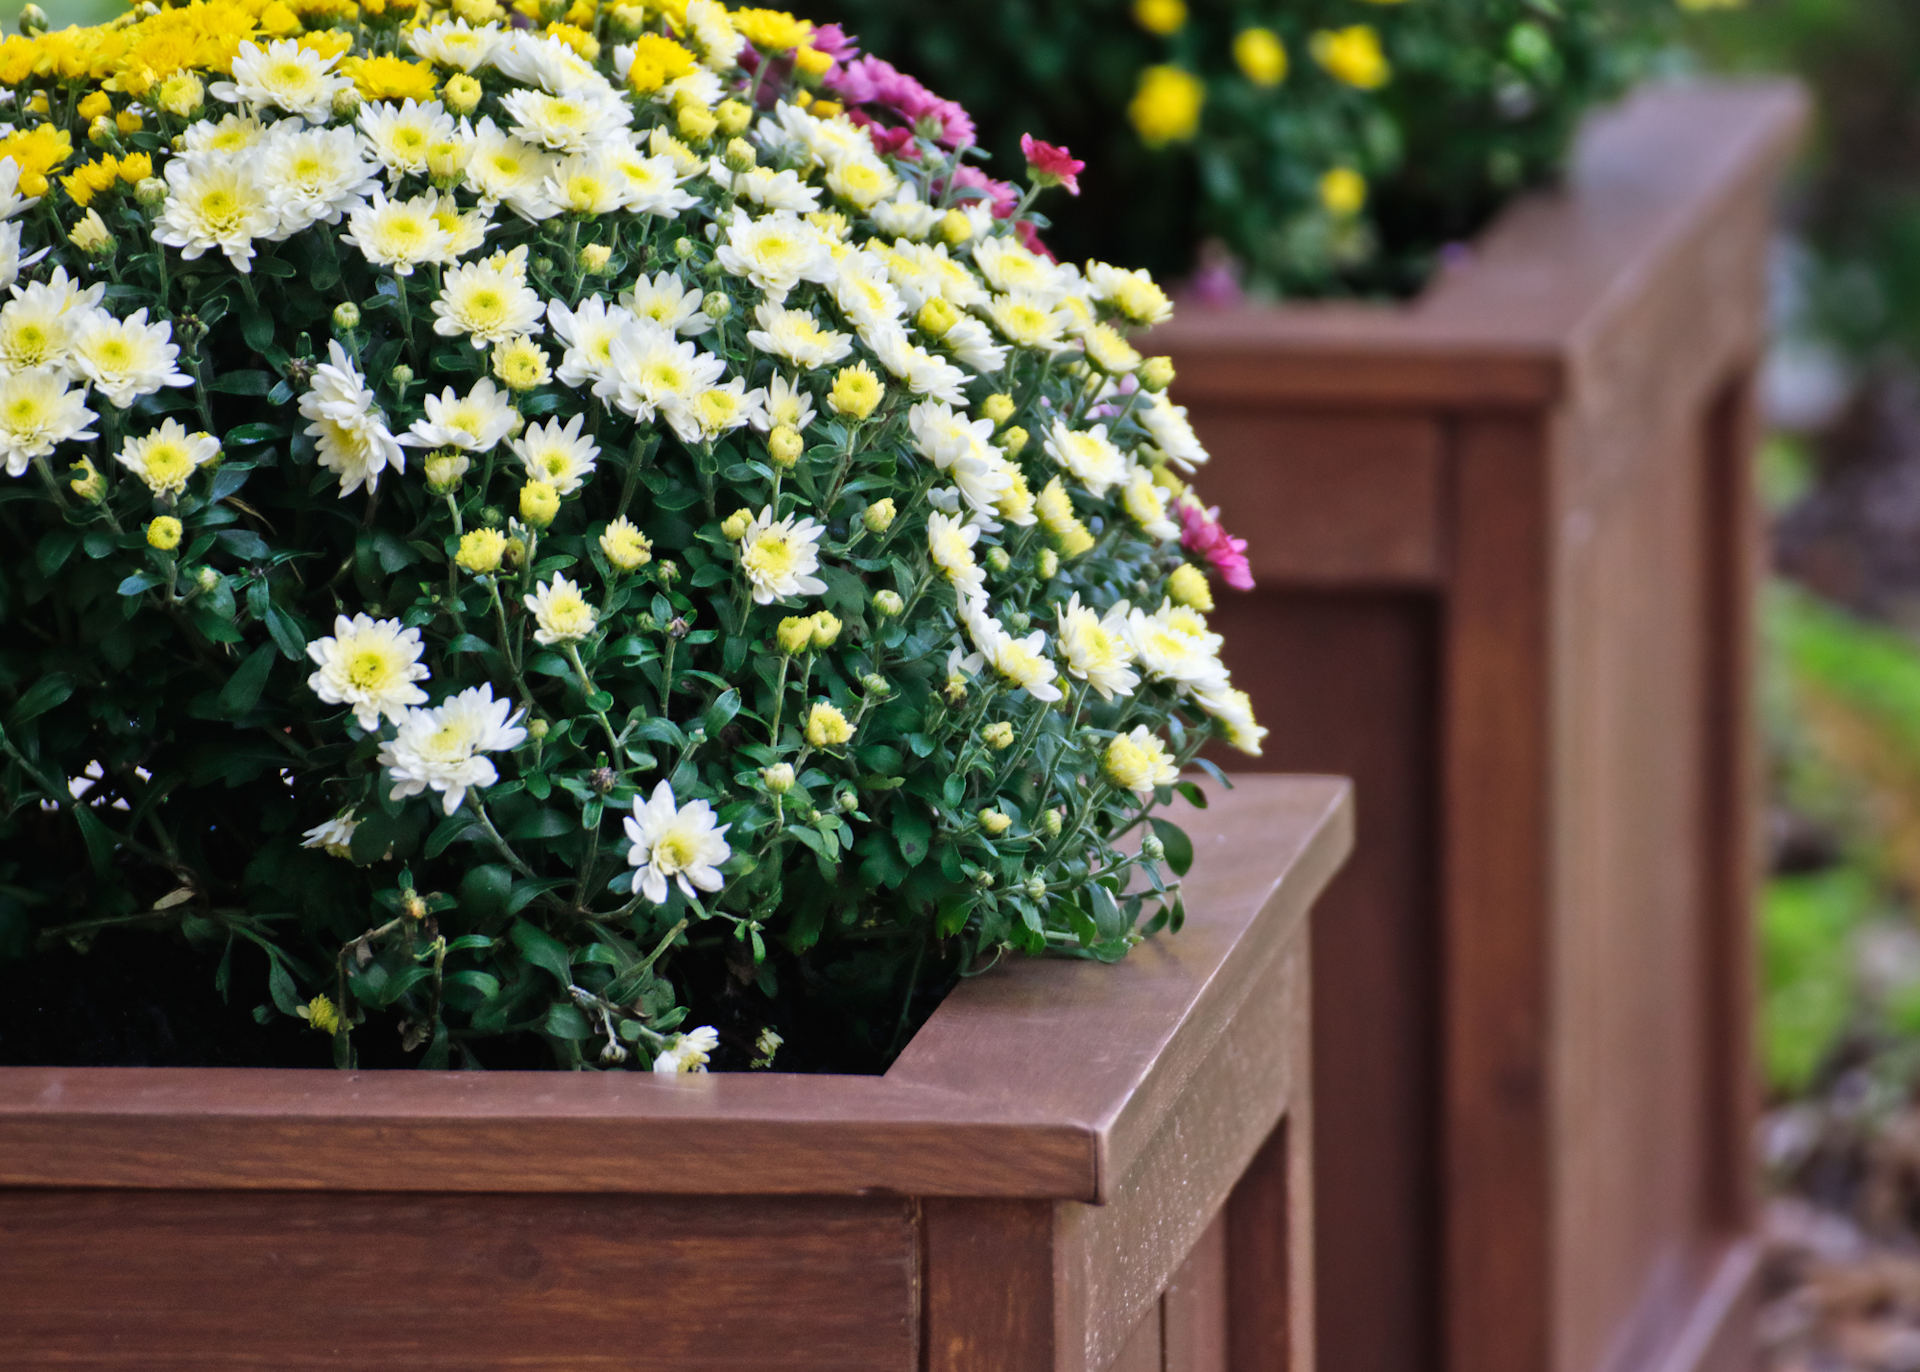 mums in planter